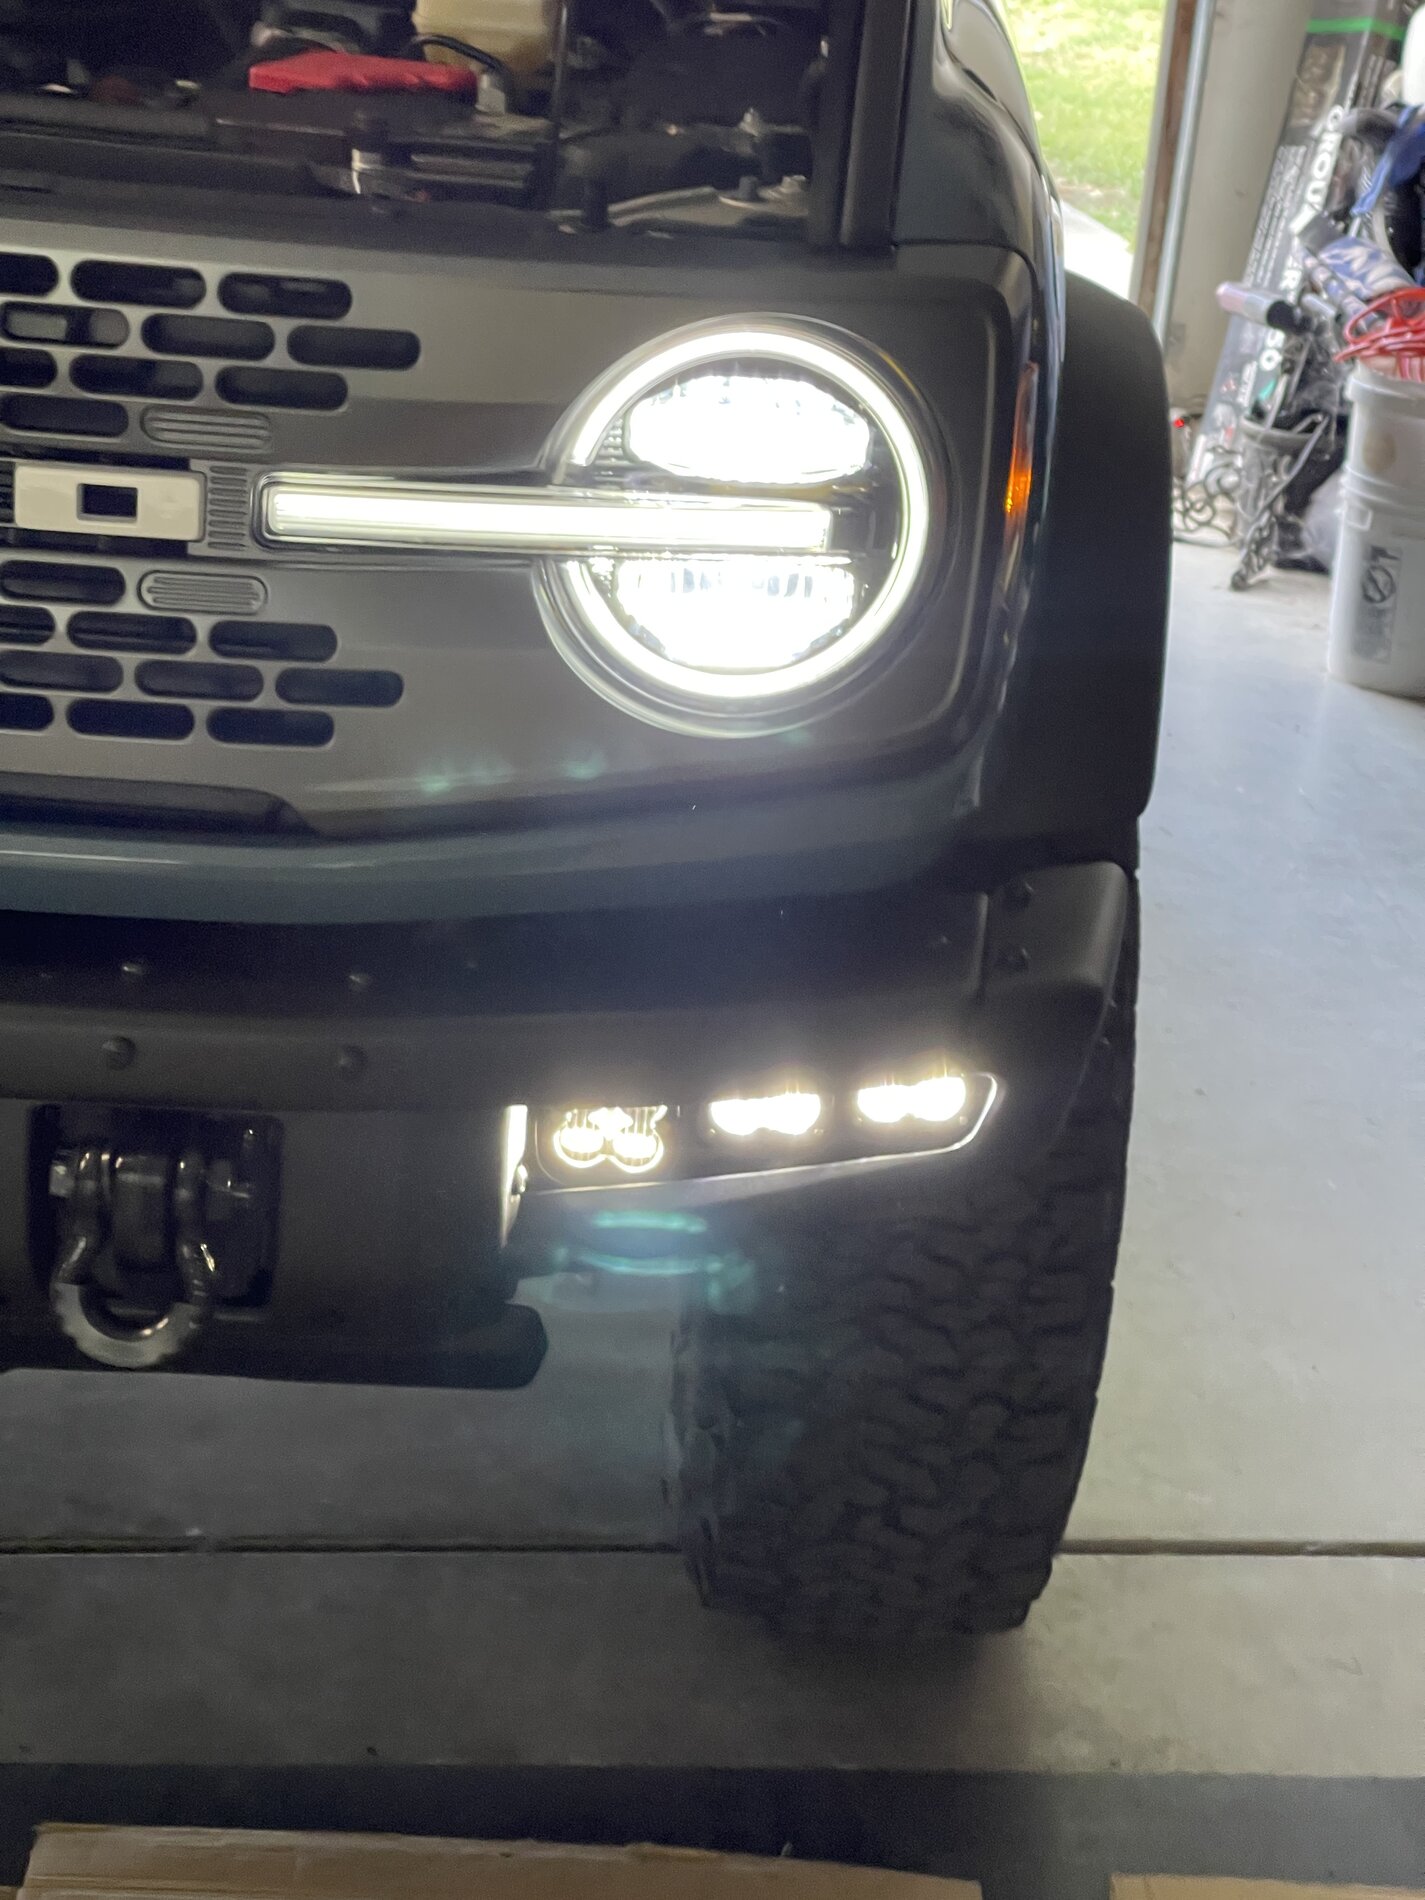 Ford Bronco Baja Lights from 4x4 LED on my Badlands 20FE6DFC-D379-4BBF-9371-E4441290FA08